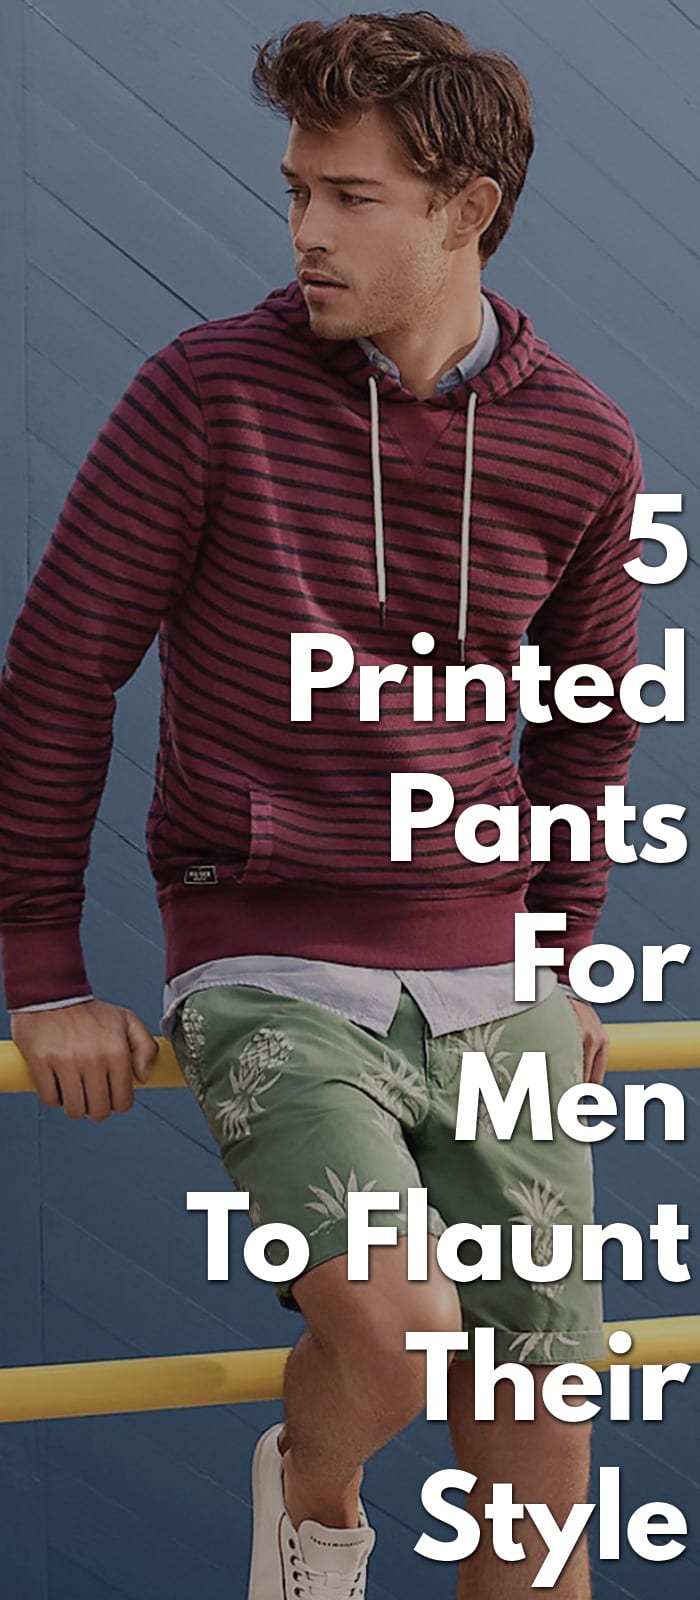 5 Printed Pants For Men To Flaunt